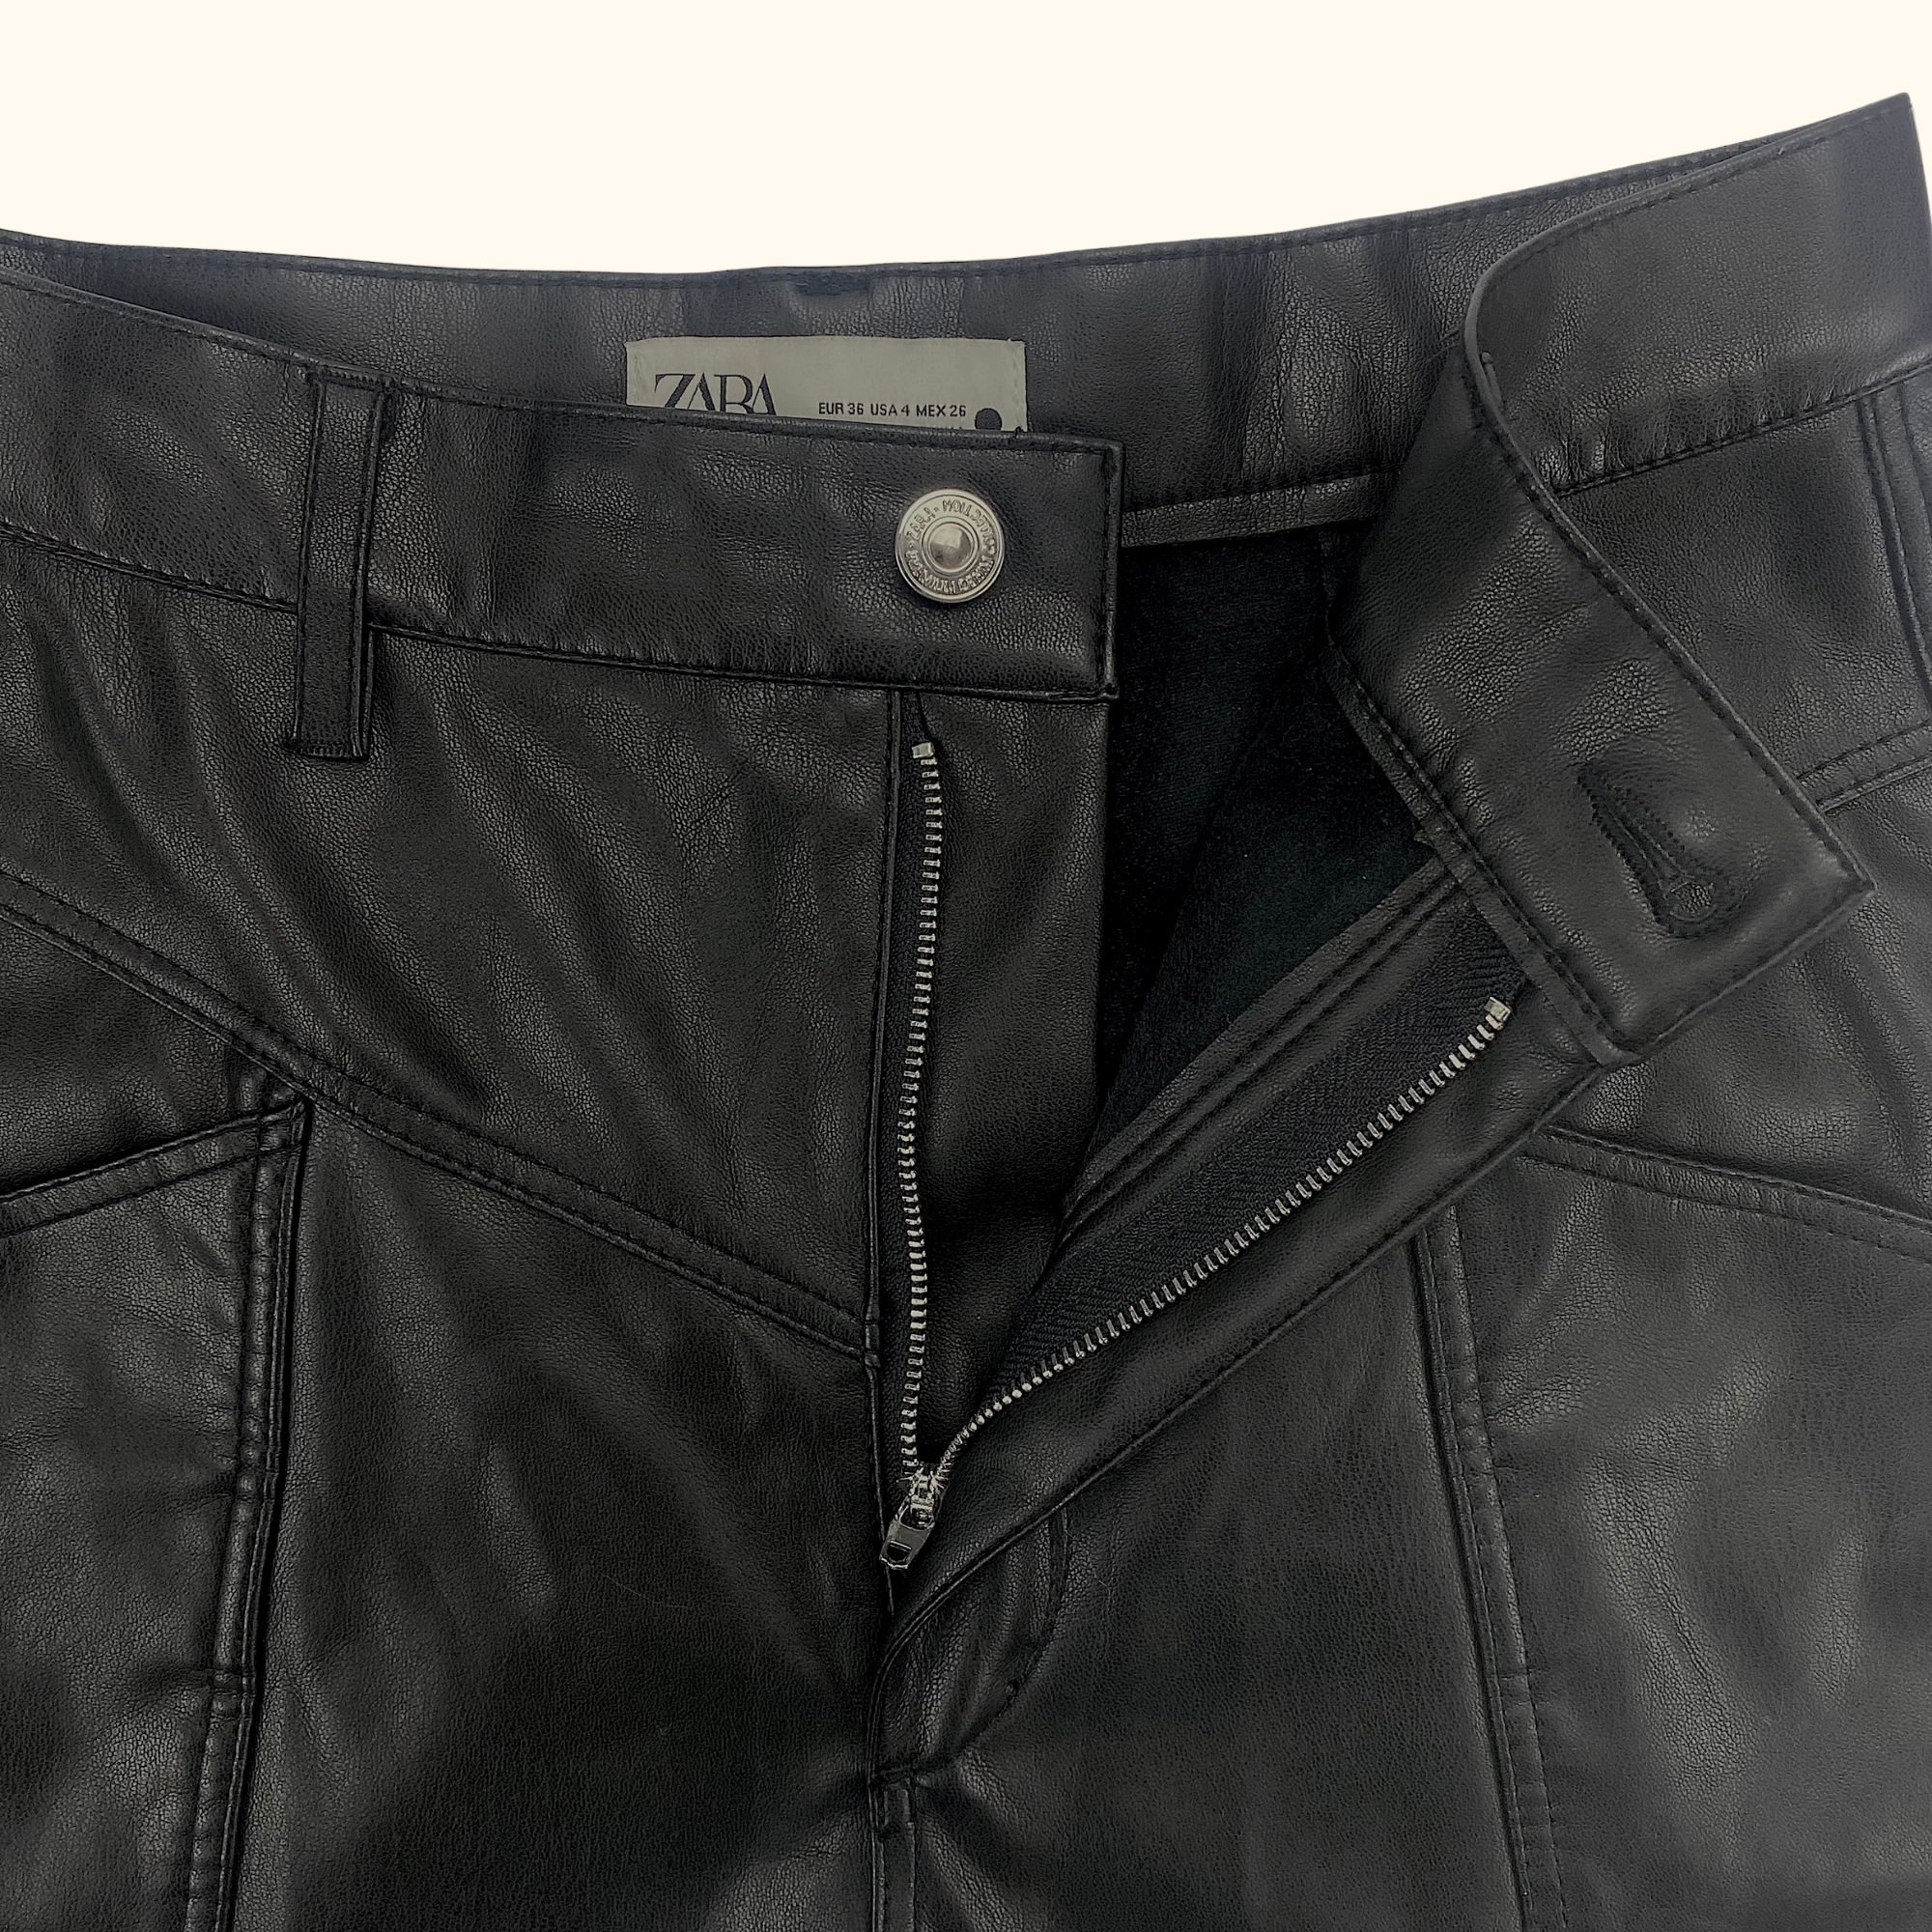 Zara High Rise Faux Leather Cropped Trousers Black - Size Small - Zara - Trousers